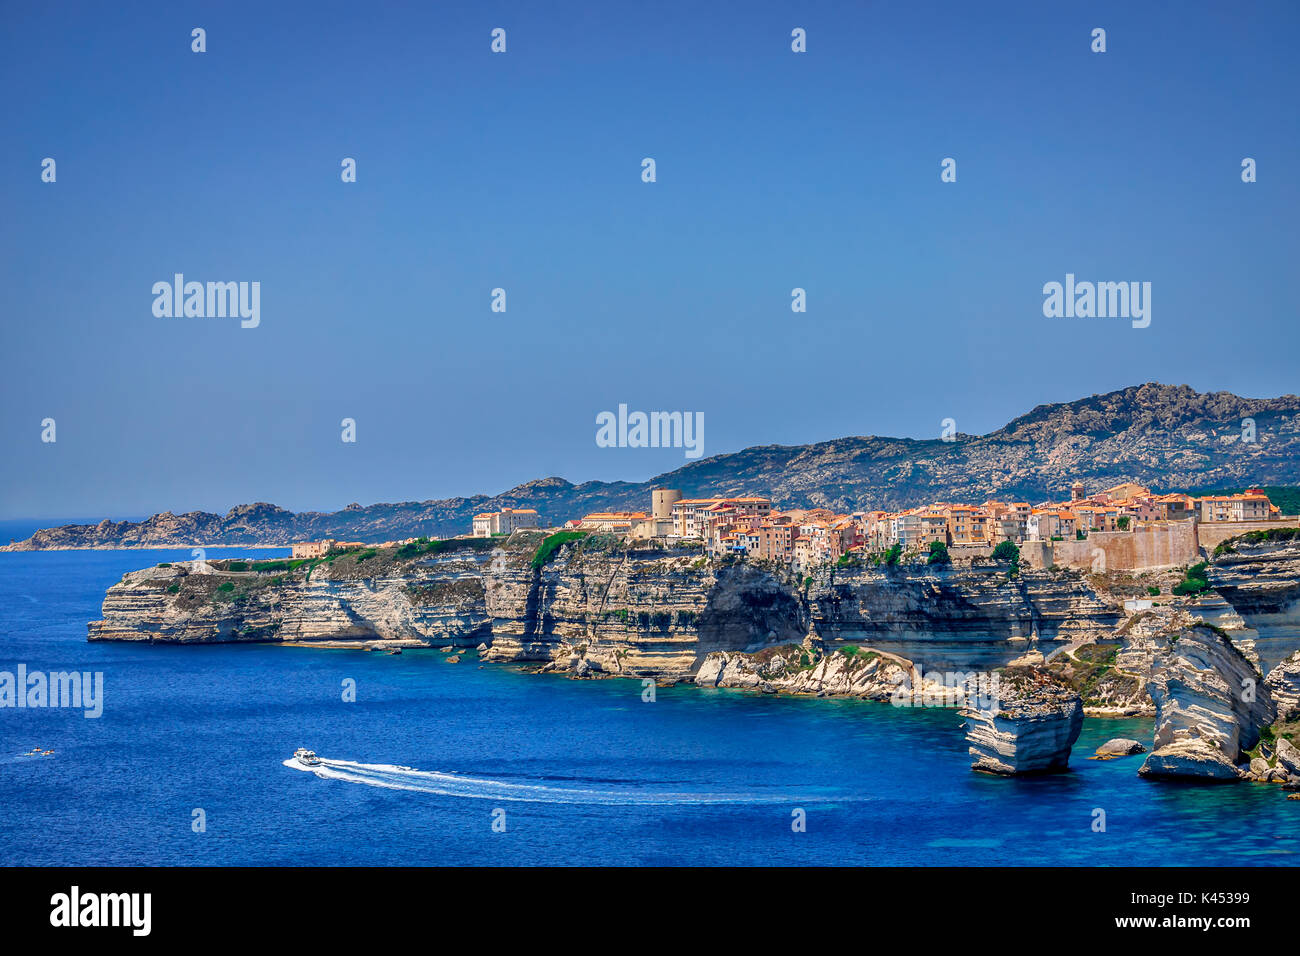 A view on the spectecular cliffs and the town of Bonifacio in Corsica, France with the ocean in the foreground Stock Photo